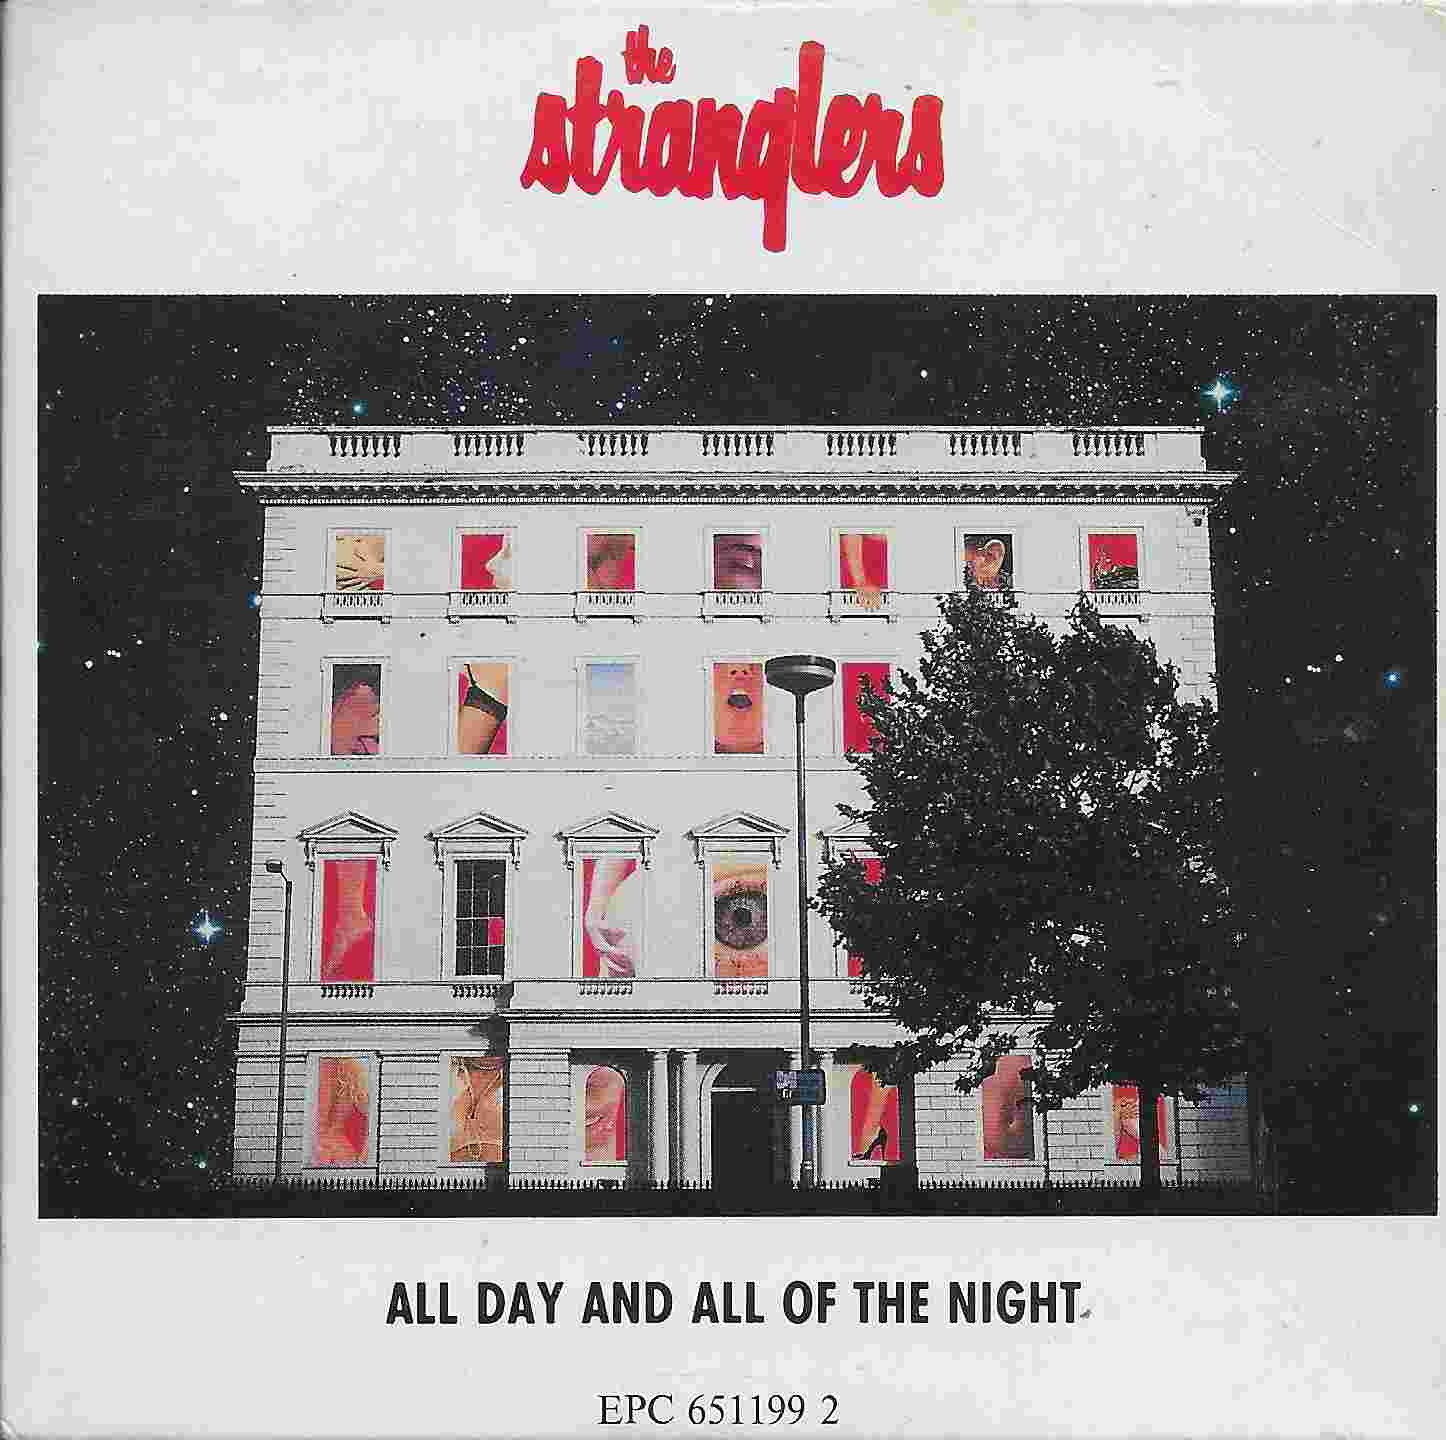 Picture of 651199 2 All day and all of the night by artist The Stranglers  from The Stranglers cdsingles